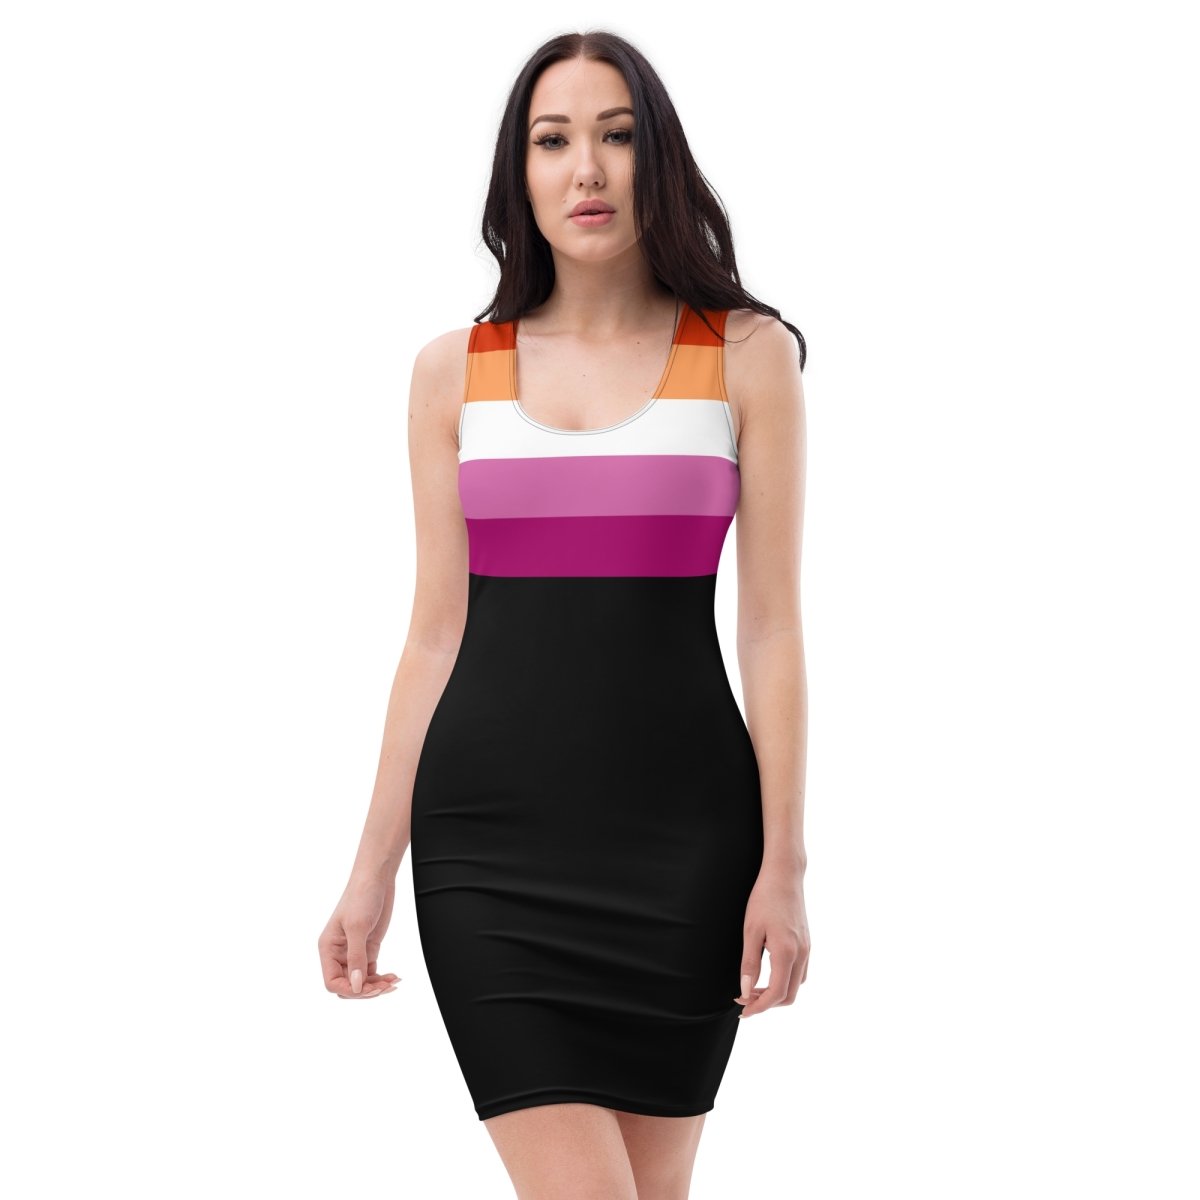 Black Lesbian Flag Fitted Dress - On Trend Shirts